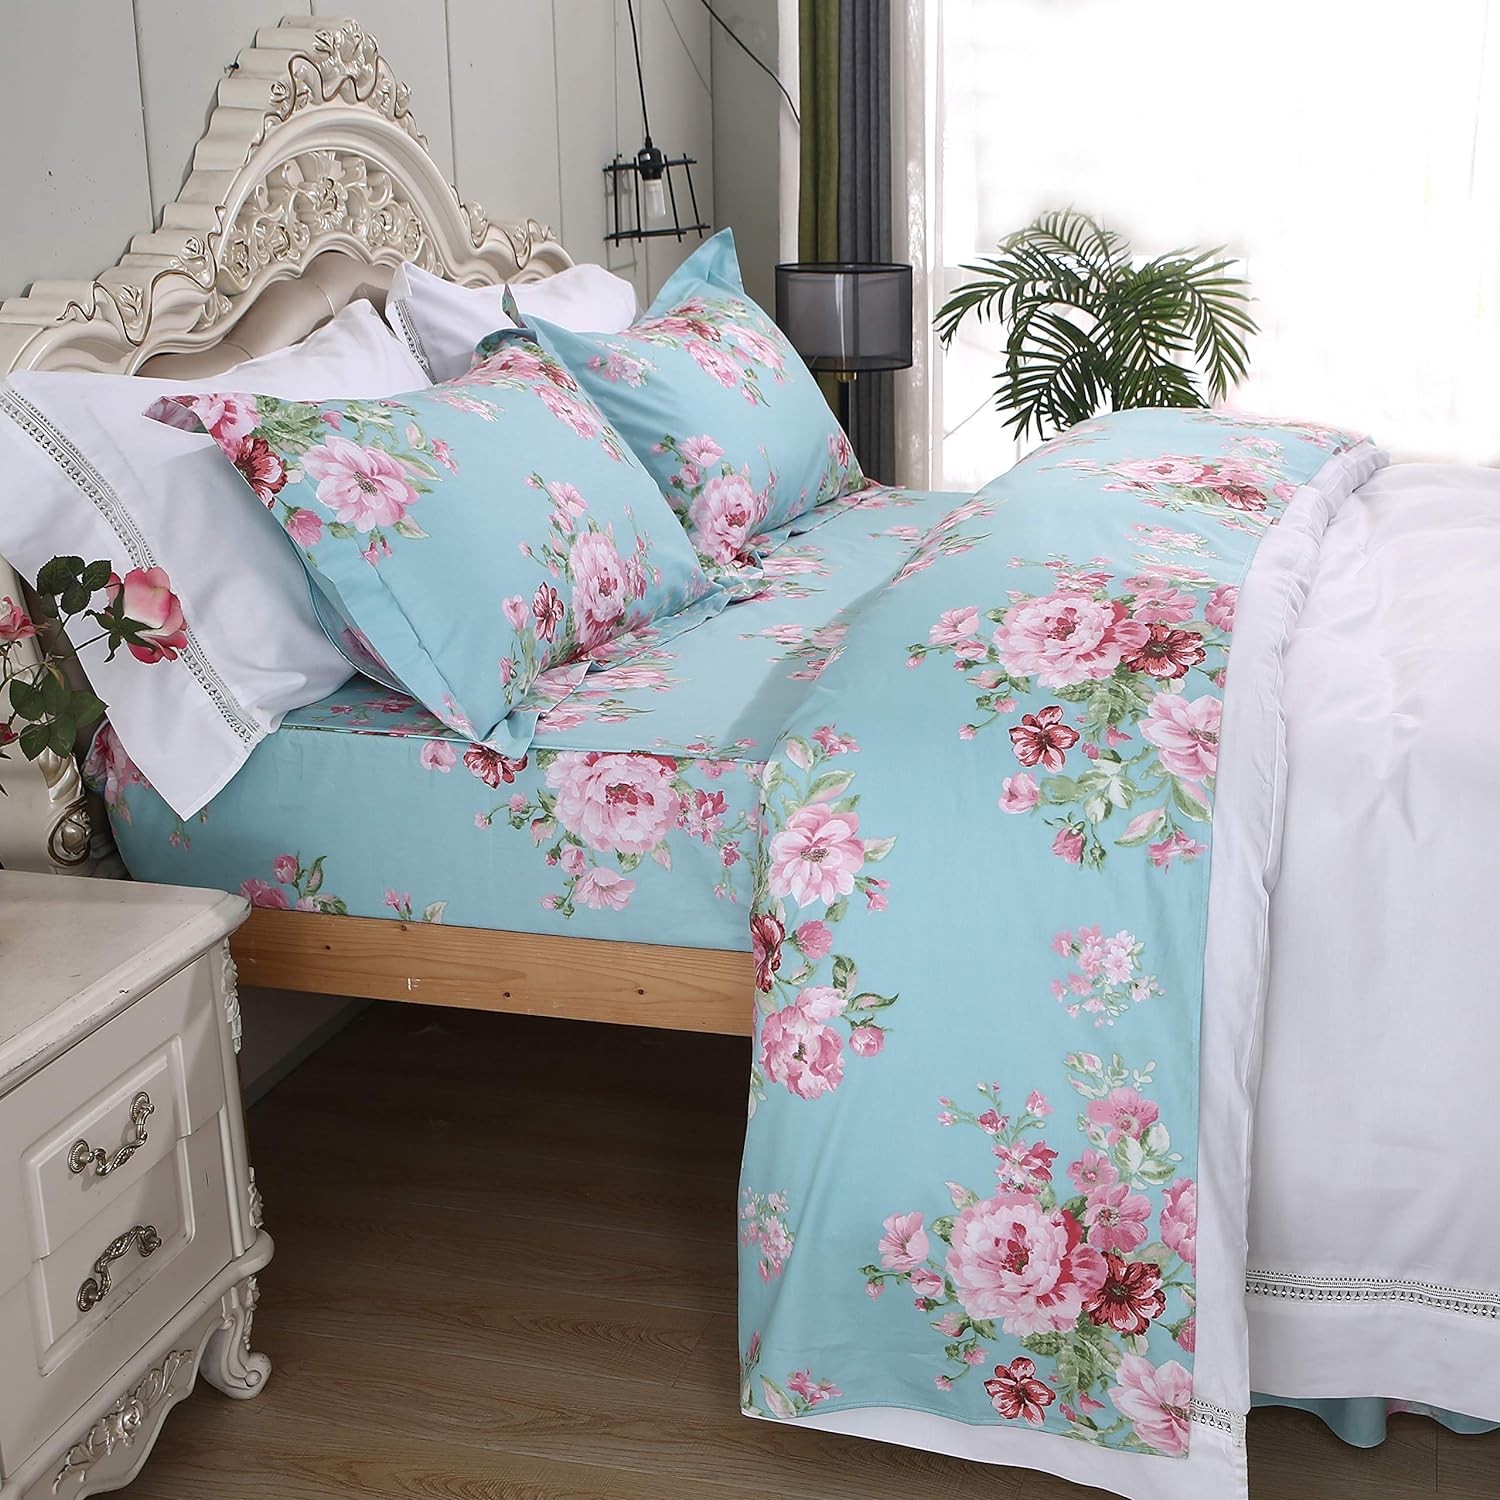 FADFAY Shabby Pink Floral Bed Sheet Set 100% Cotton Deep Pocket 4-Piece Twin Size